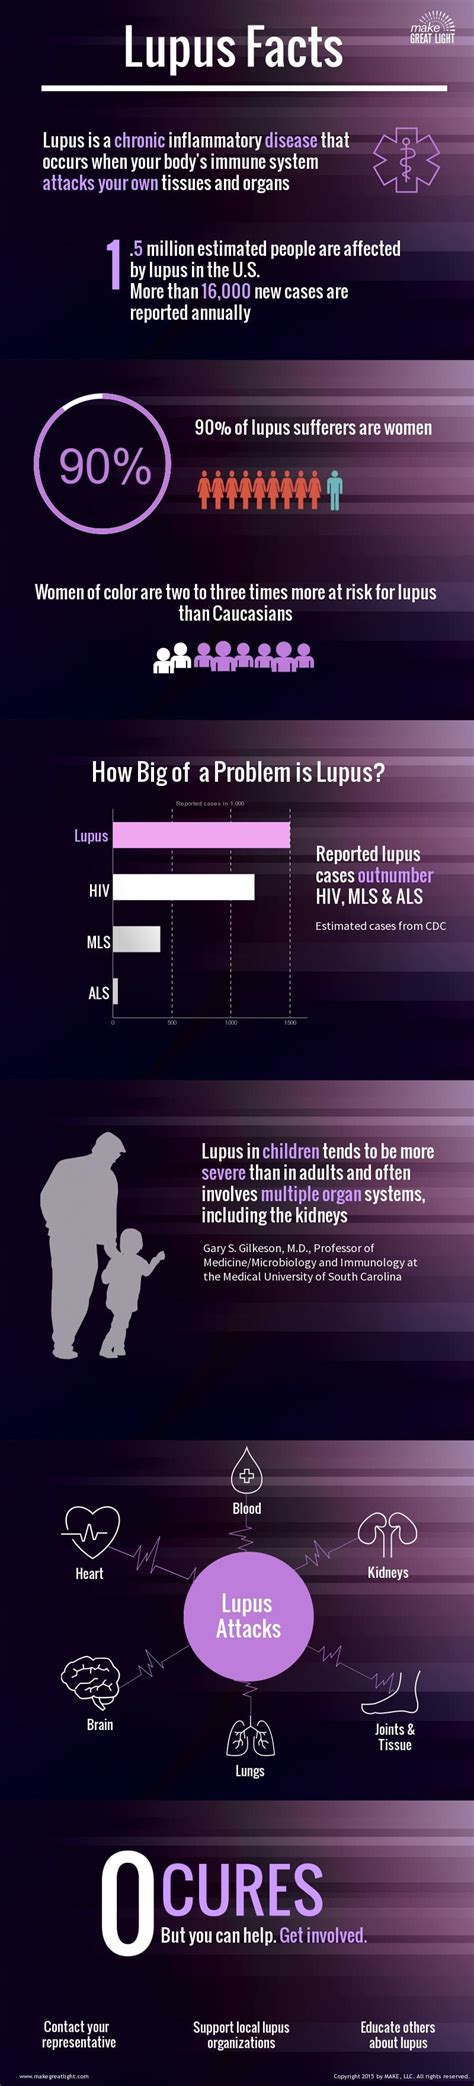 Lupus Facts Infographic